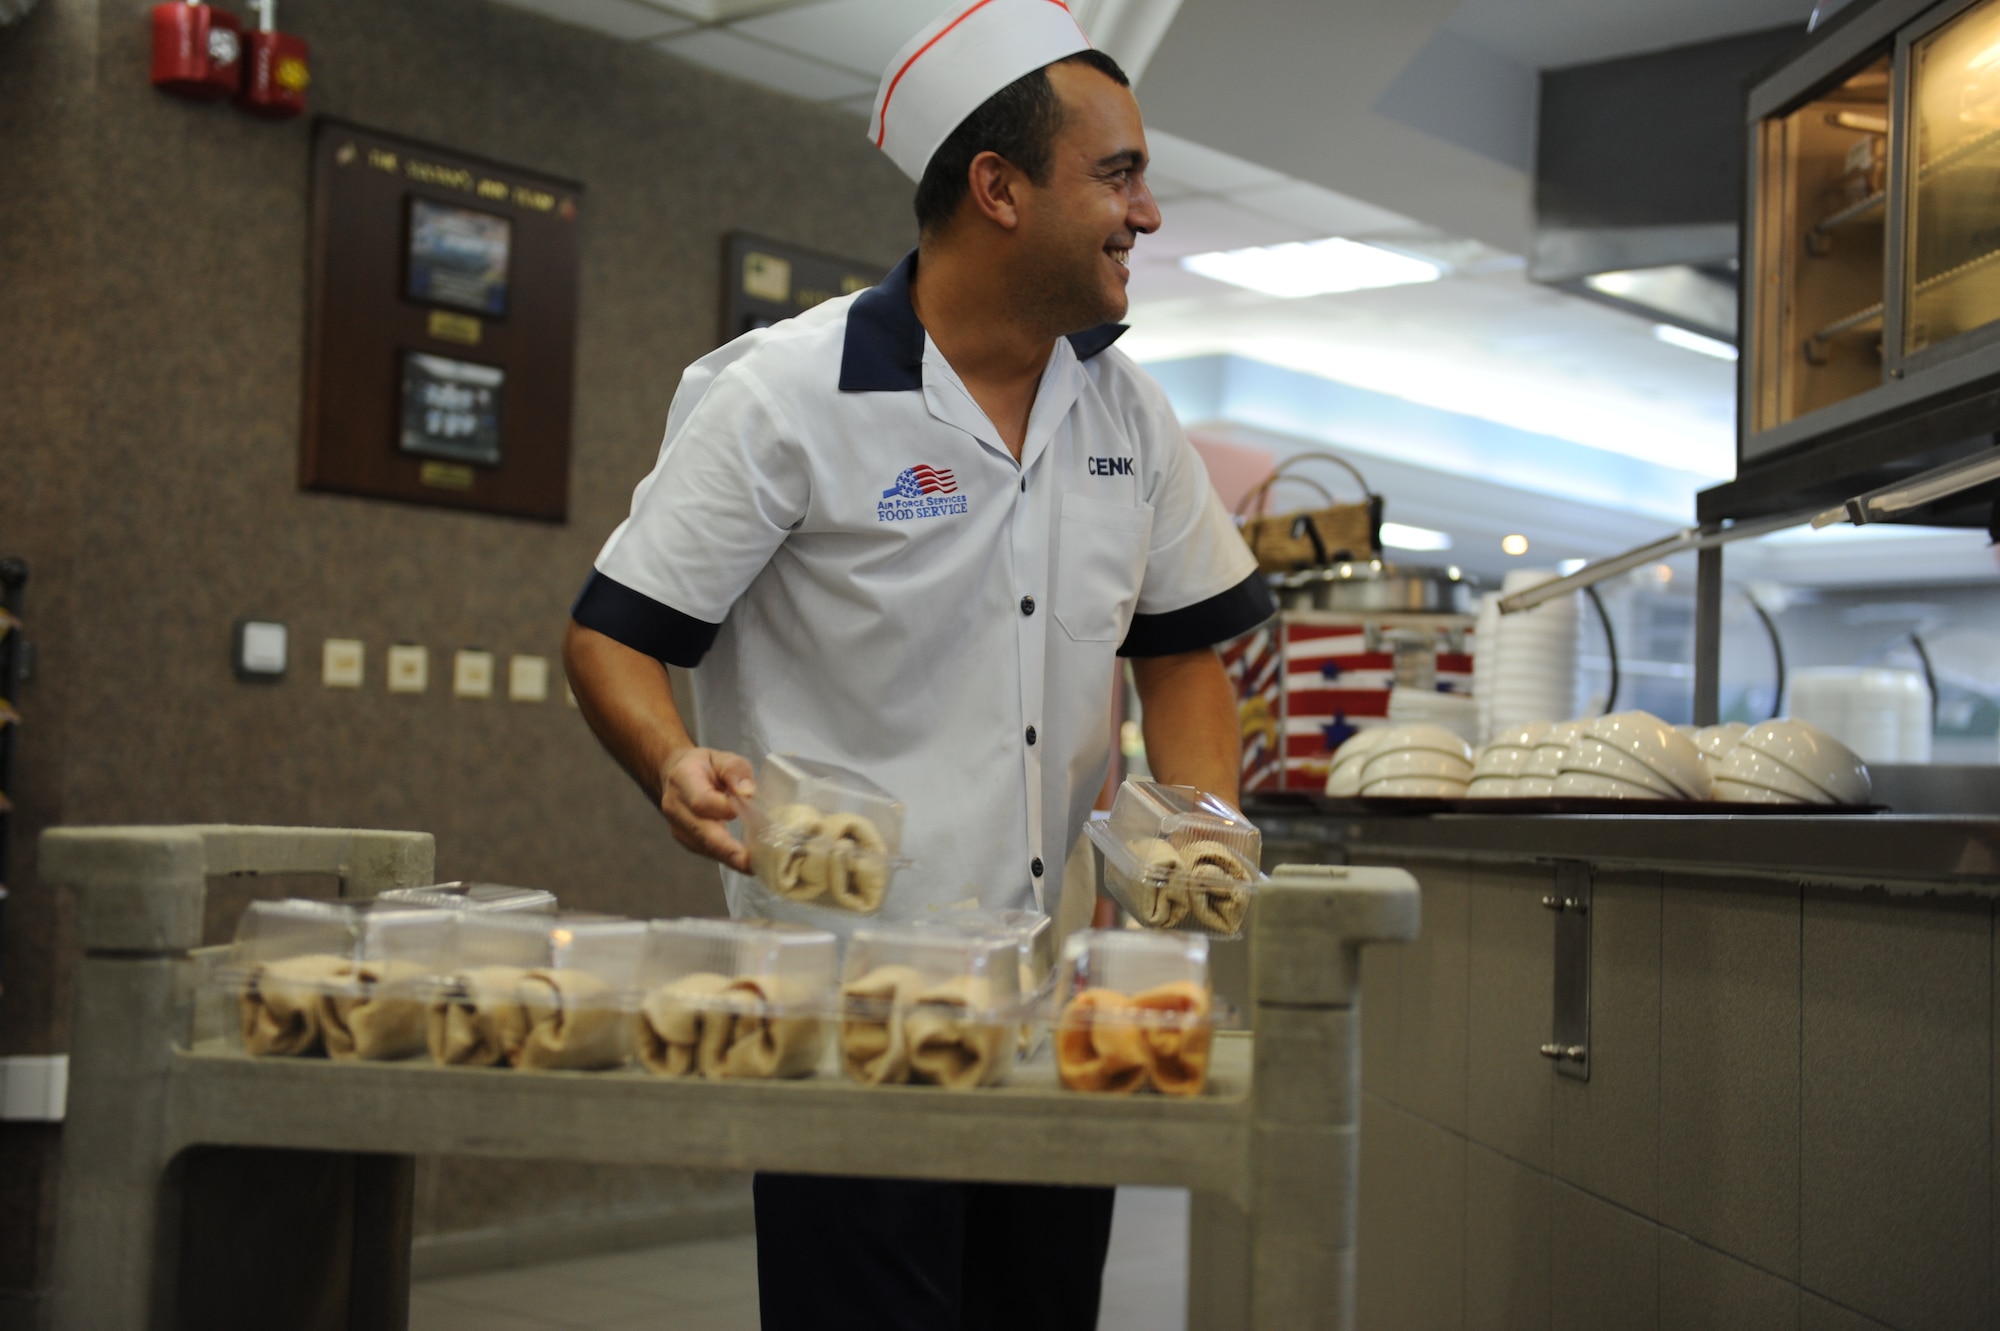 Cenk Kor, 39th Force Support Squadron apprentice cook, puts a variety of pre-made sandwiches away in preparation for lunch July 27, 2012, at the Sultan's Inn Dining Facility at Incirlik Air Base, Turkey. The facility offers a main line, short order line, and a variety of made-to-order foods such as sandwiches and chicken at lunch.  (U.S. Air Force photo by Senior Airman William A. O'Brien/Released) 